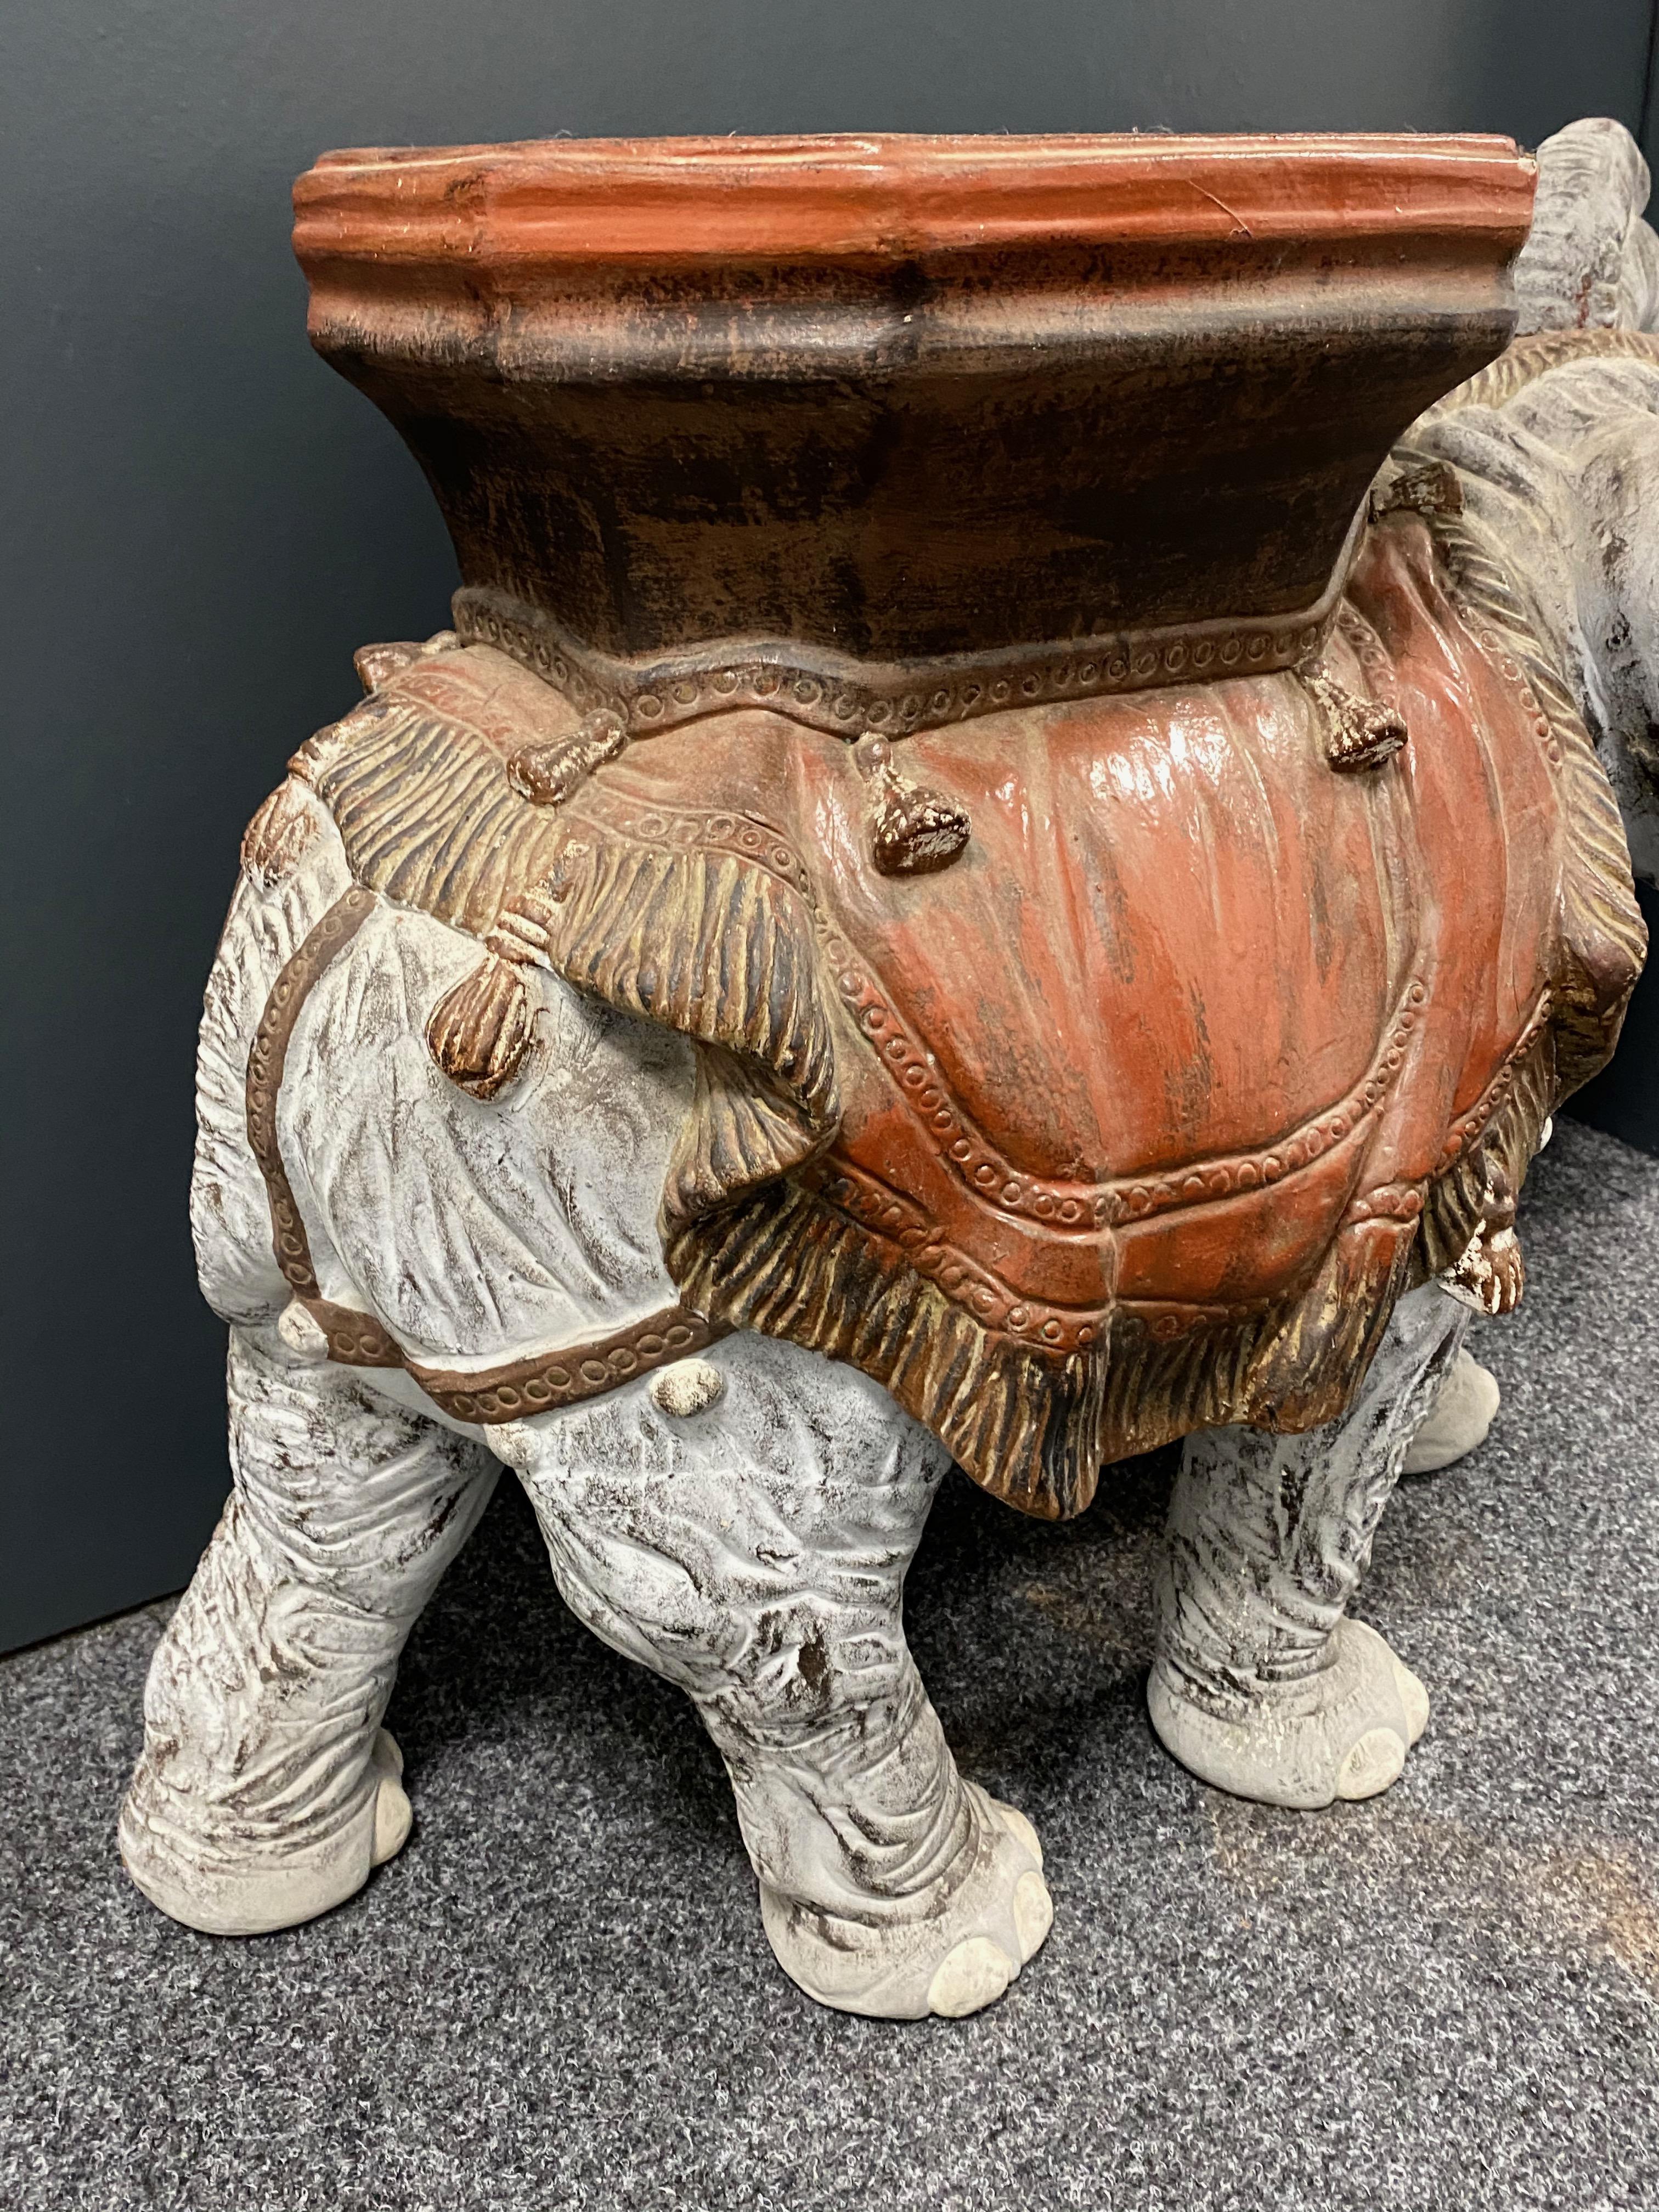 Mid-20th Century Hollywood Regency Italian Terracotta Elephant Garden Stool Plant Stand or Seat For Sale